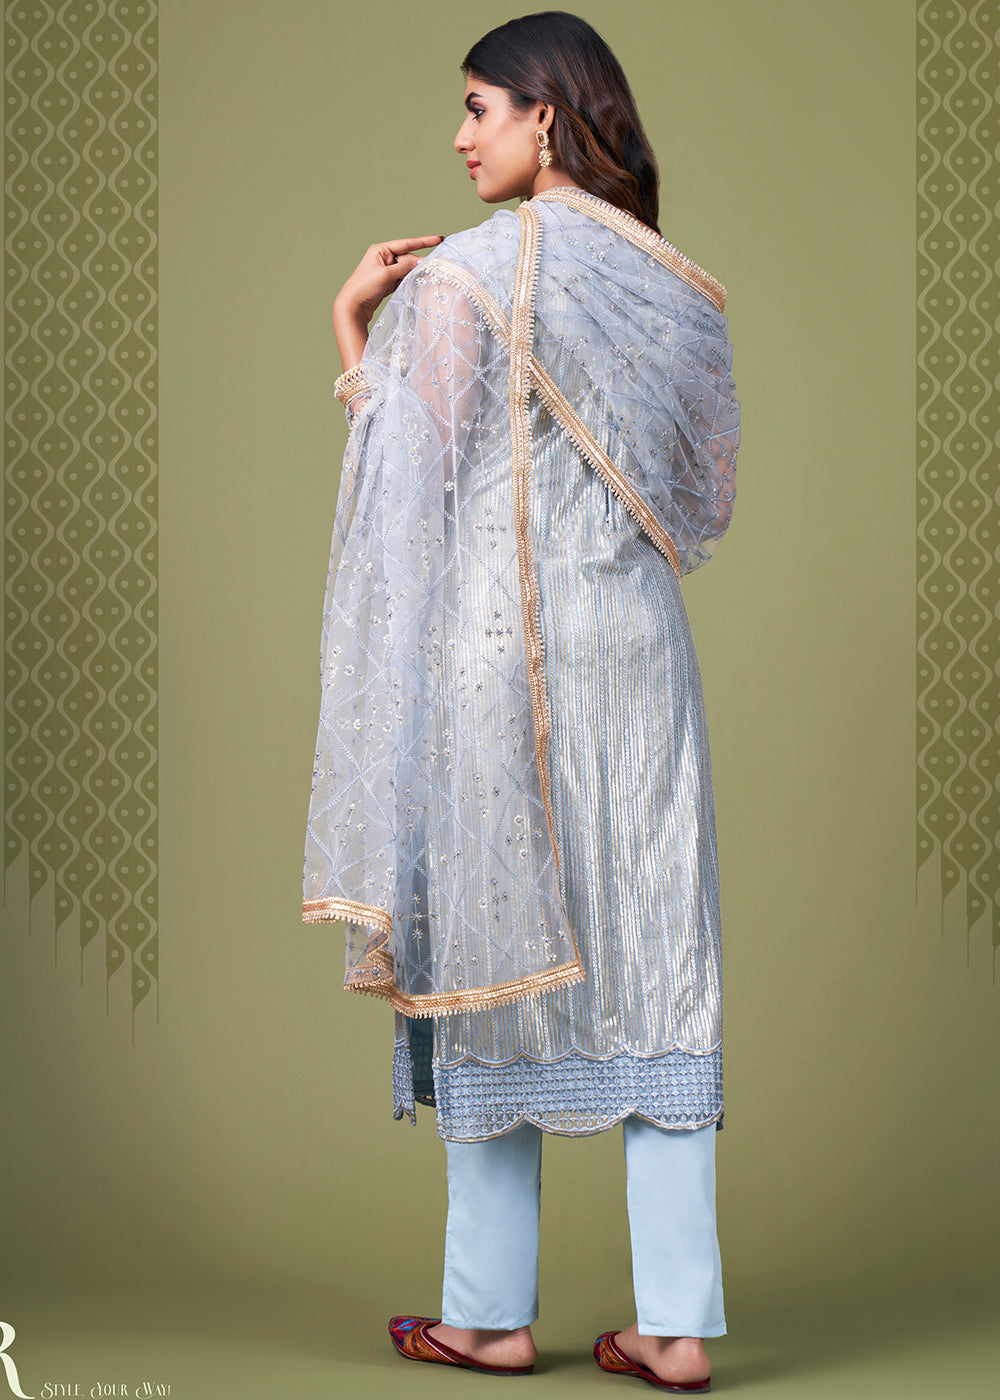 Buy Now Attractive Sky Blue Tone to Tone Embroidered Salwar Kameez Online in USA, UK, Canada, Germany, Australia & Worldwide at Empress Clothing. 